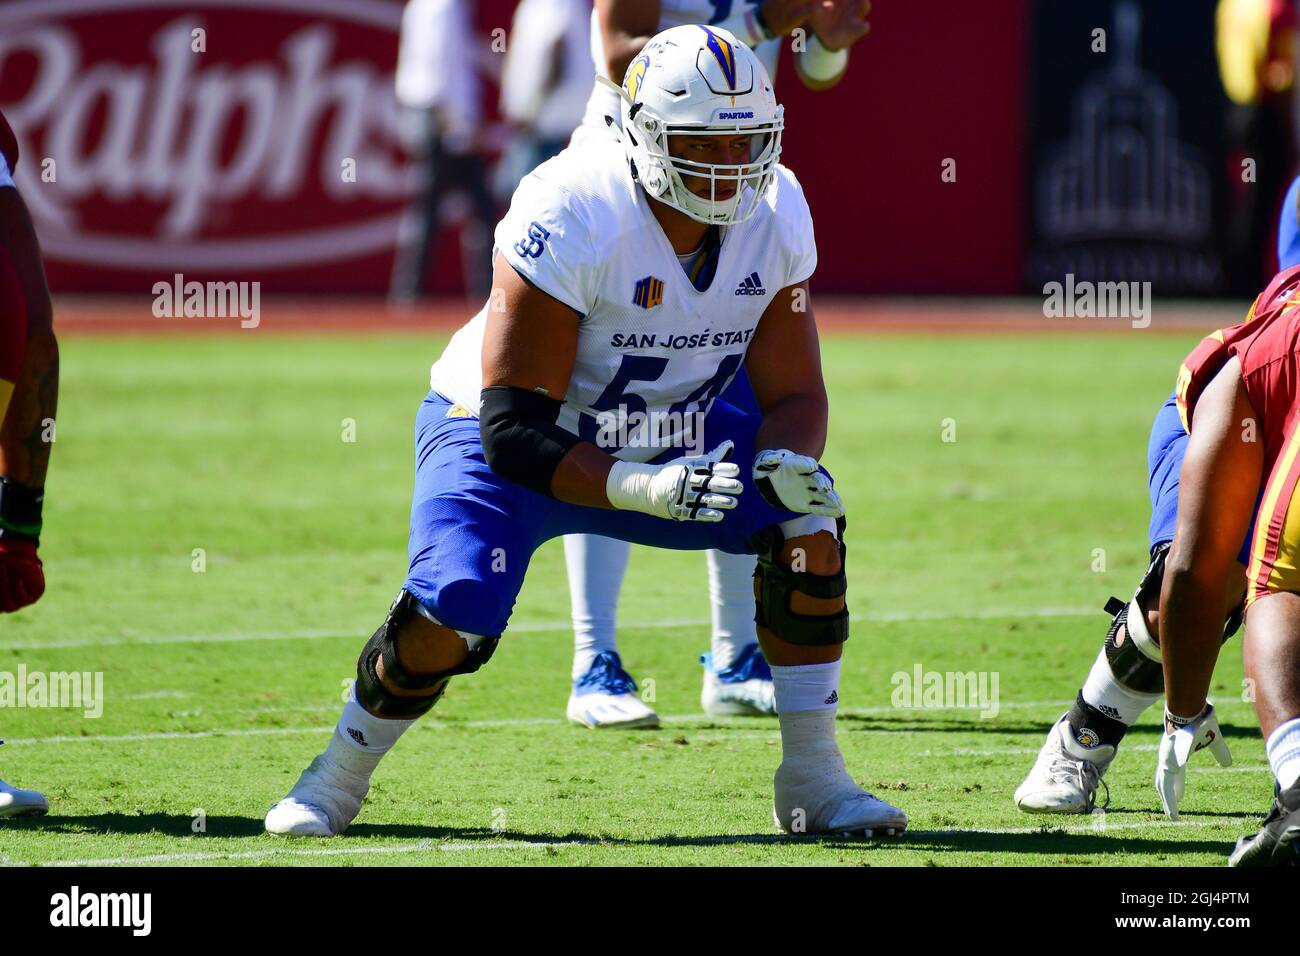 San Jose State Spartans offensive tackle Jaime Navarro (54) during an NCAA football game against the Southern California Trojans, Saturday, Sep. 4, 20 Stock Photo